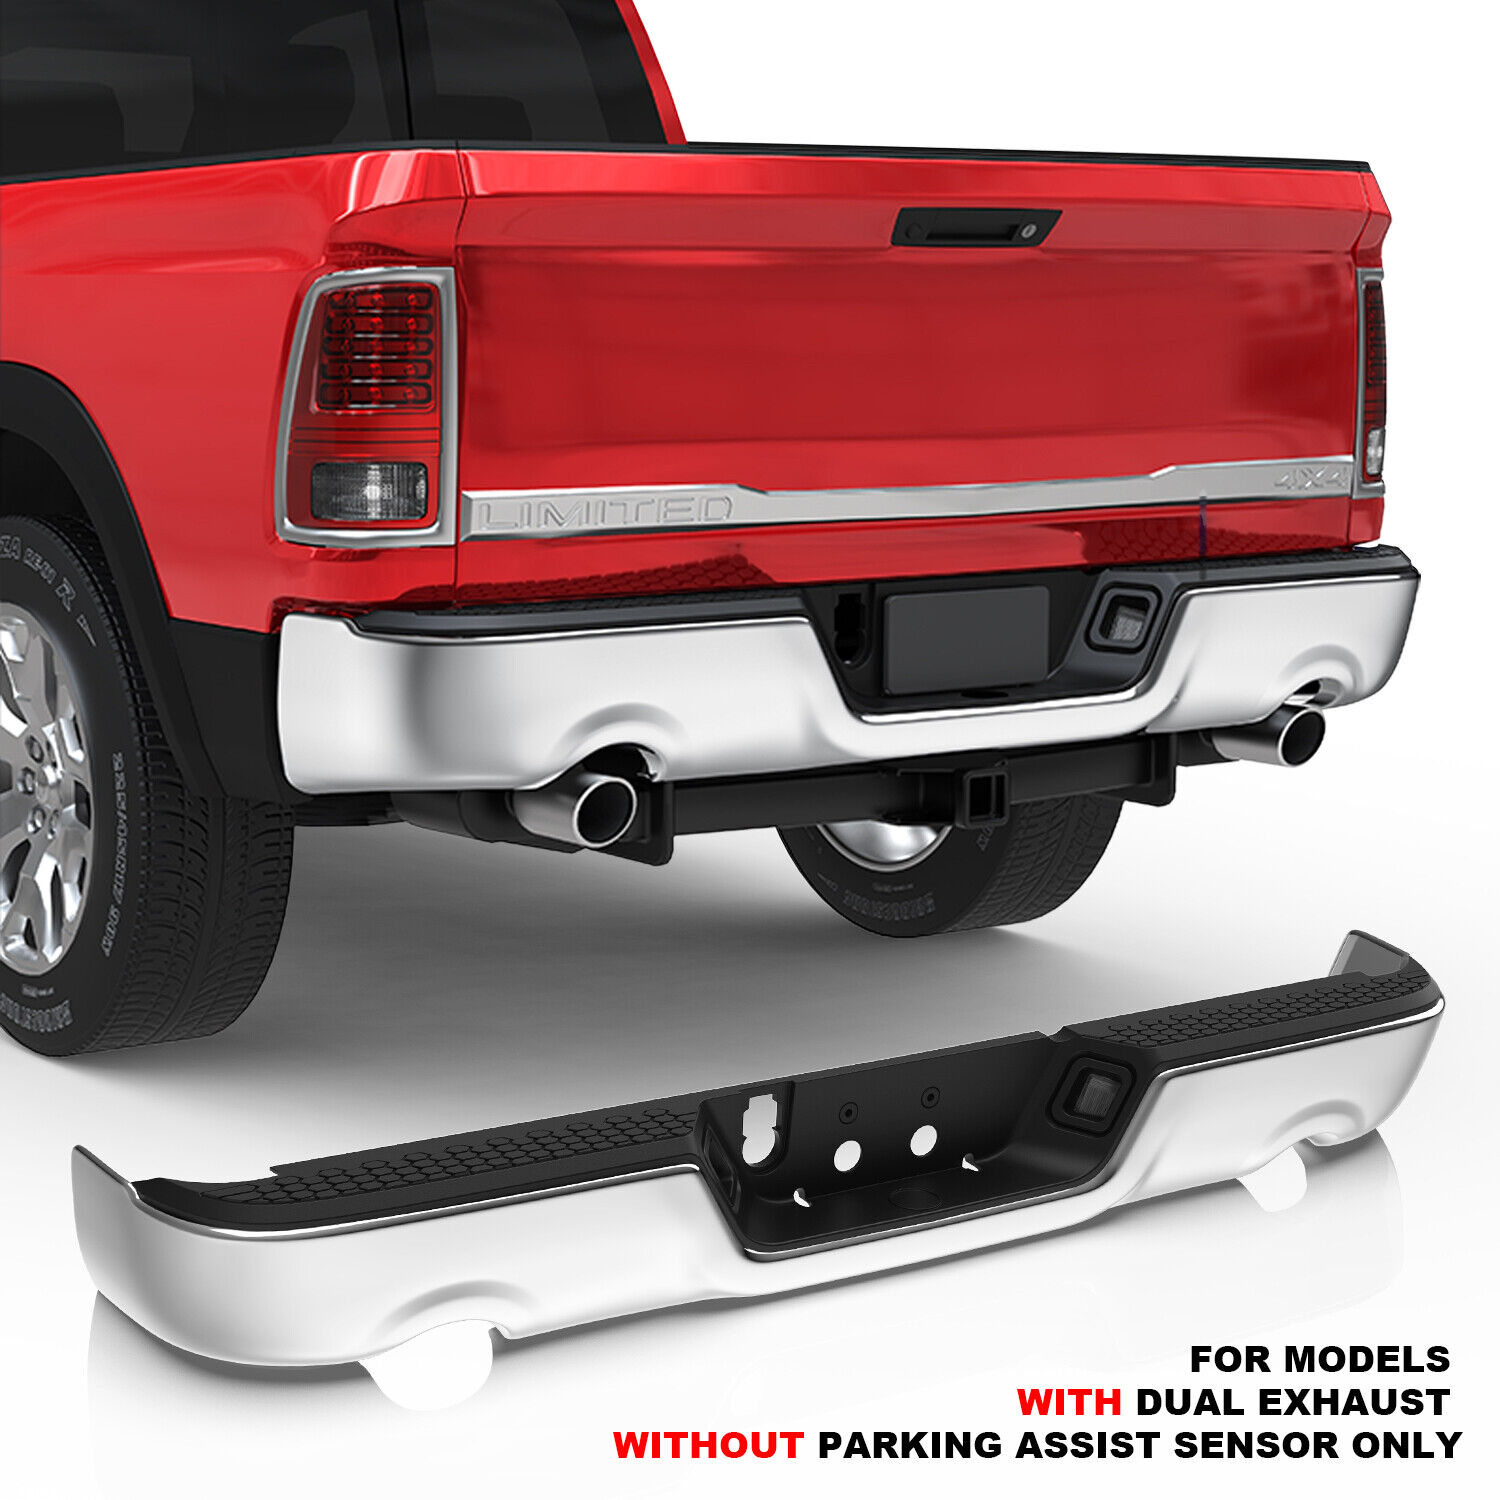 Chrome Rear Step Bumper For 2009-2018 Ram 1500 Dual Exhaust without Sensor